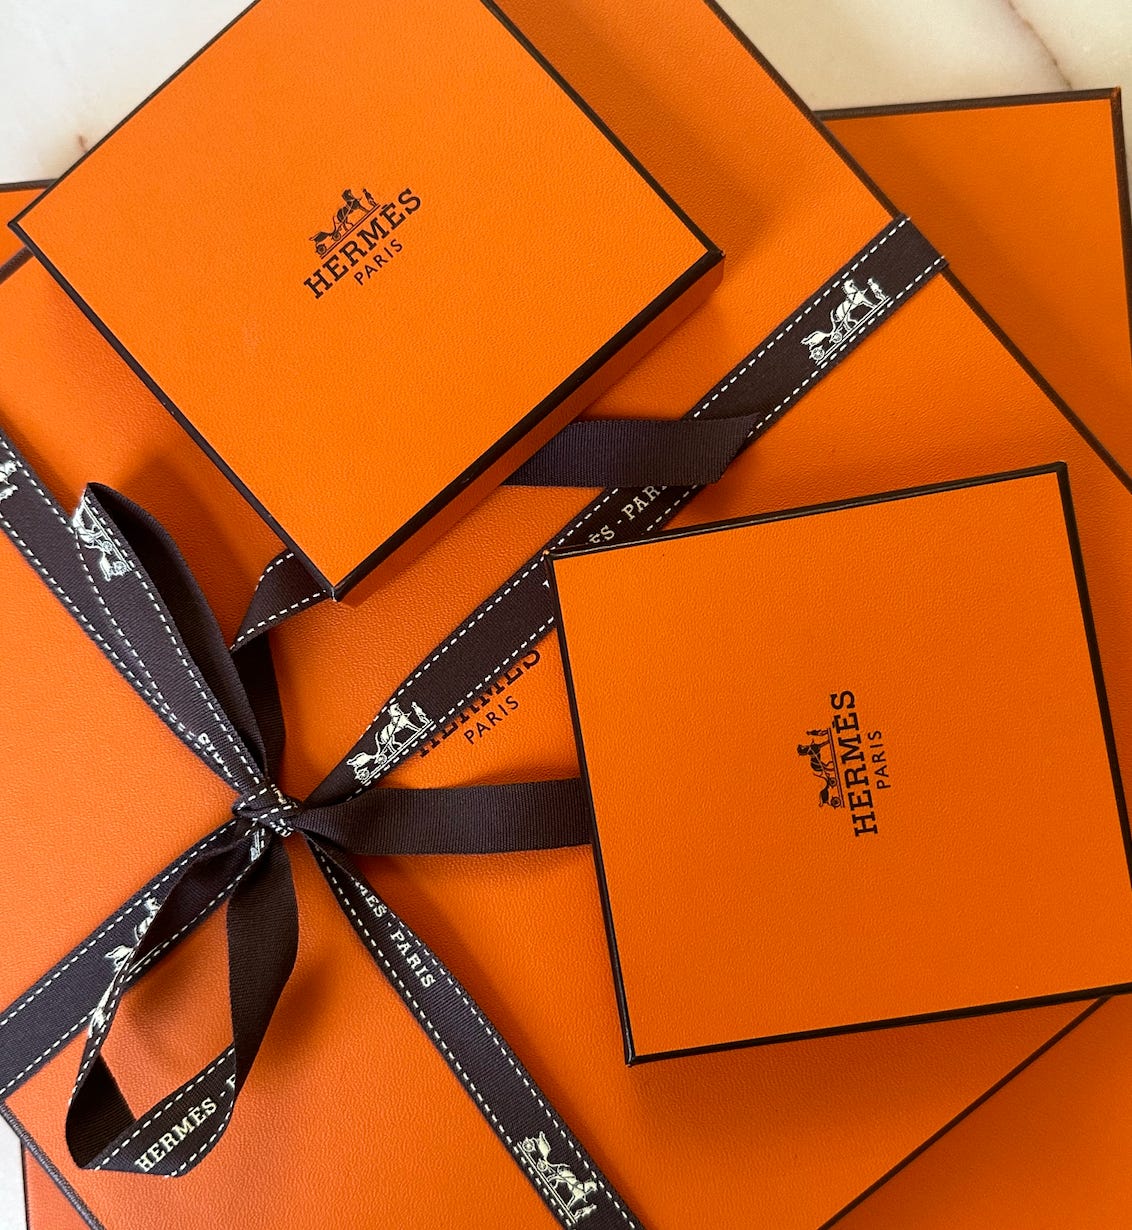 Live Reports and Updates on Hermès Sales in Paris and the US